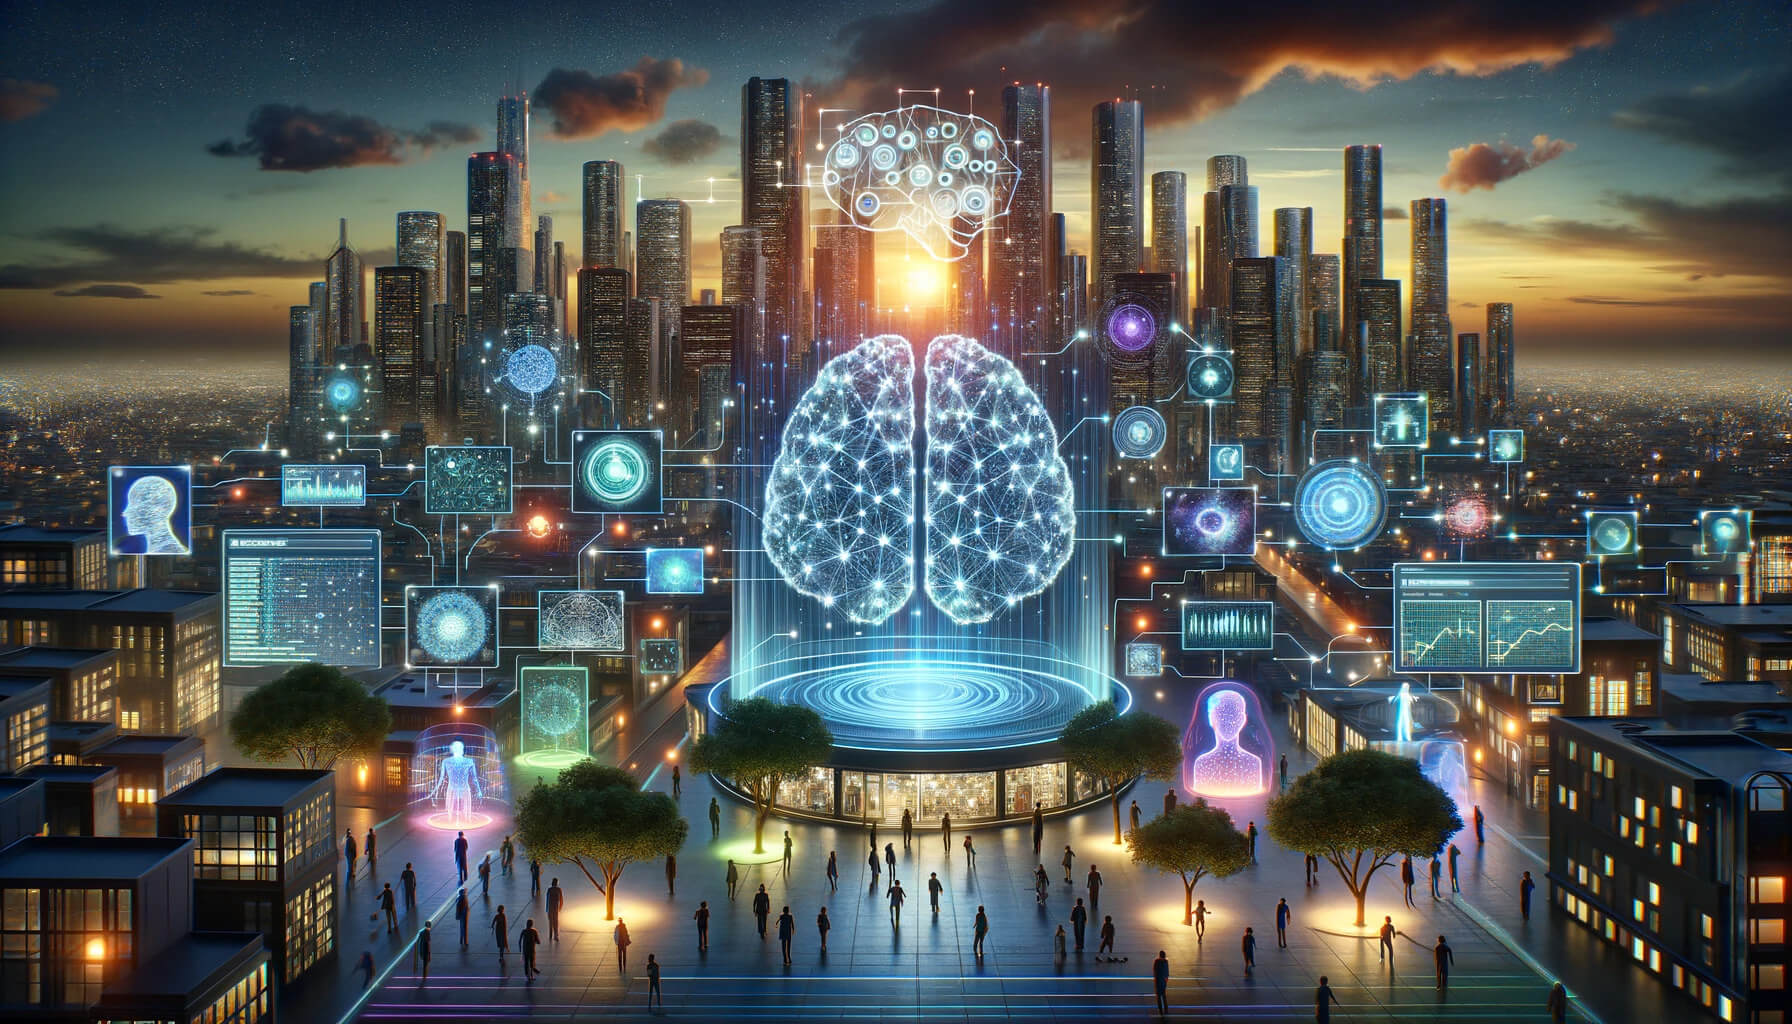 Panoramic futuristic urban skyline at dusk with holographic brain projection and Large Language Model concept visualization, featuring interconnected nodes and human silhouettes.